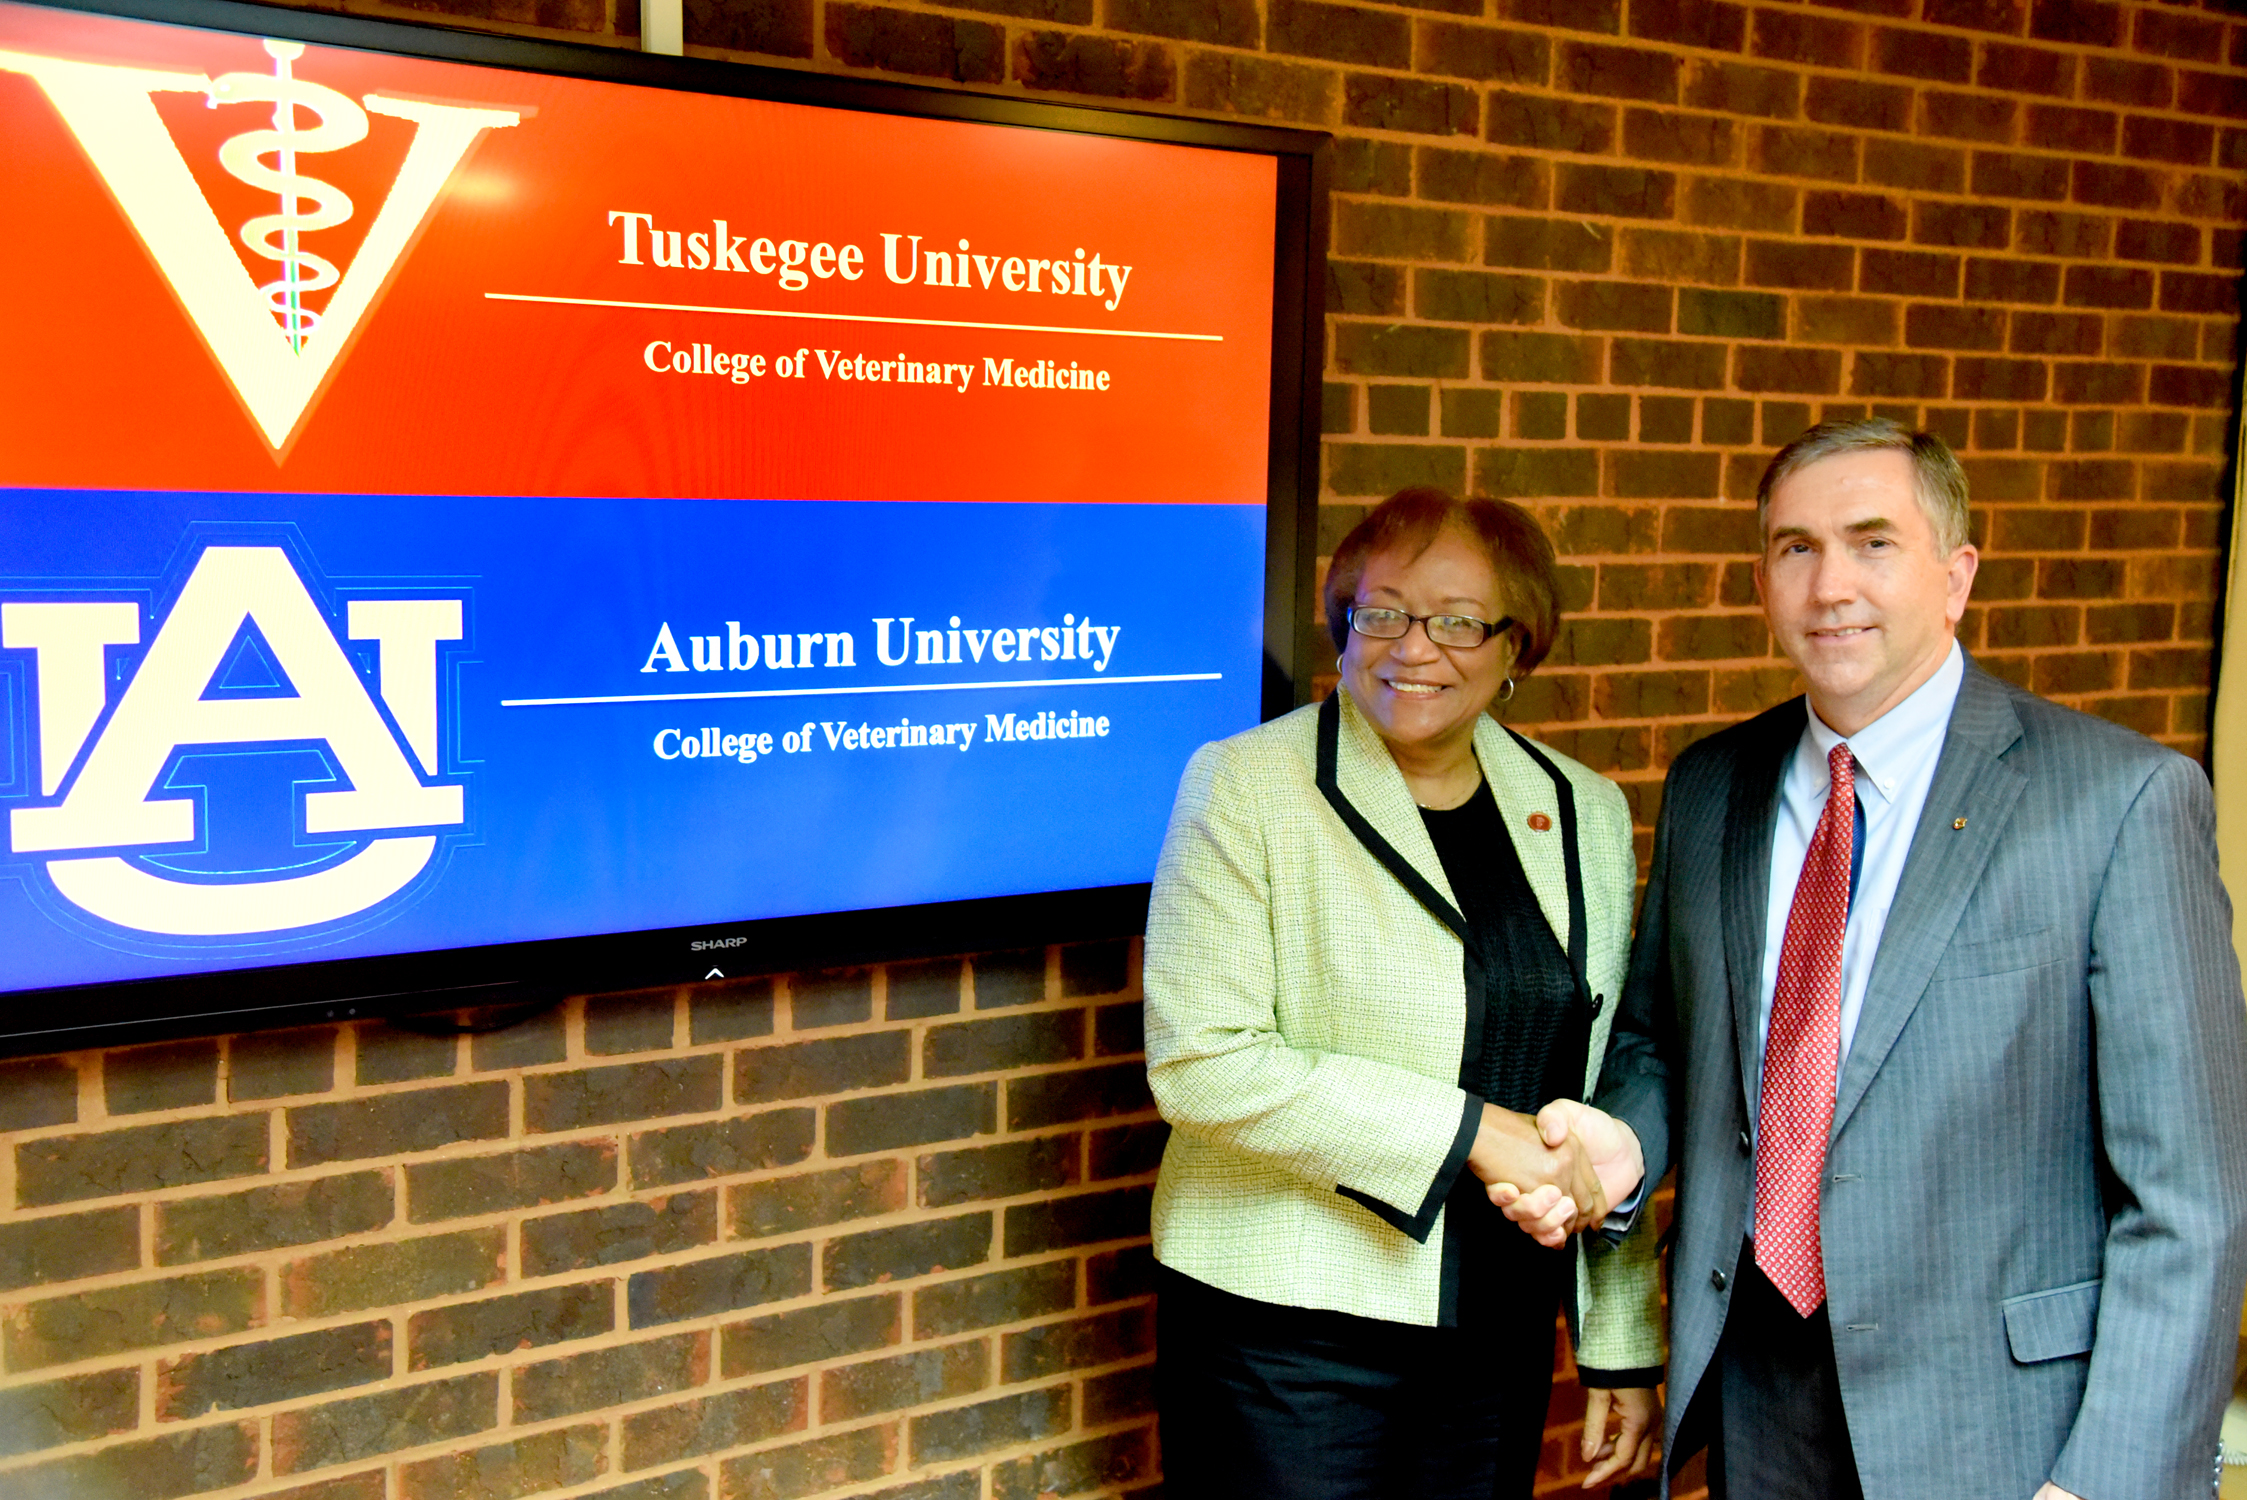 Dean Ruby Perry and Dean Calvin Johnson shake hands after signing the MOU.